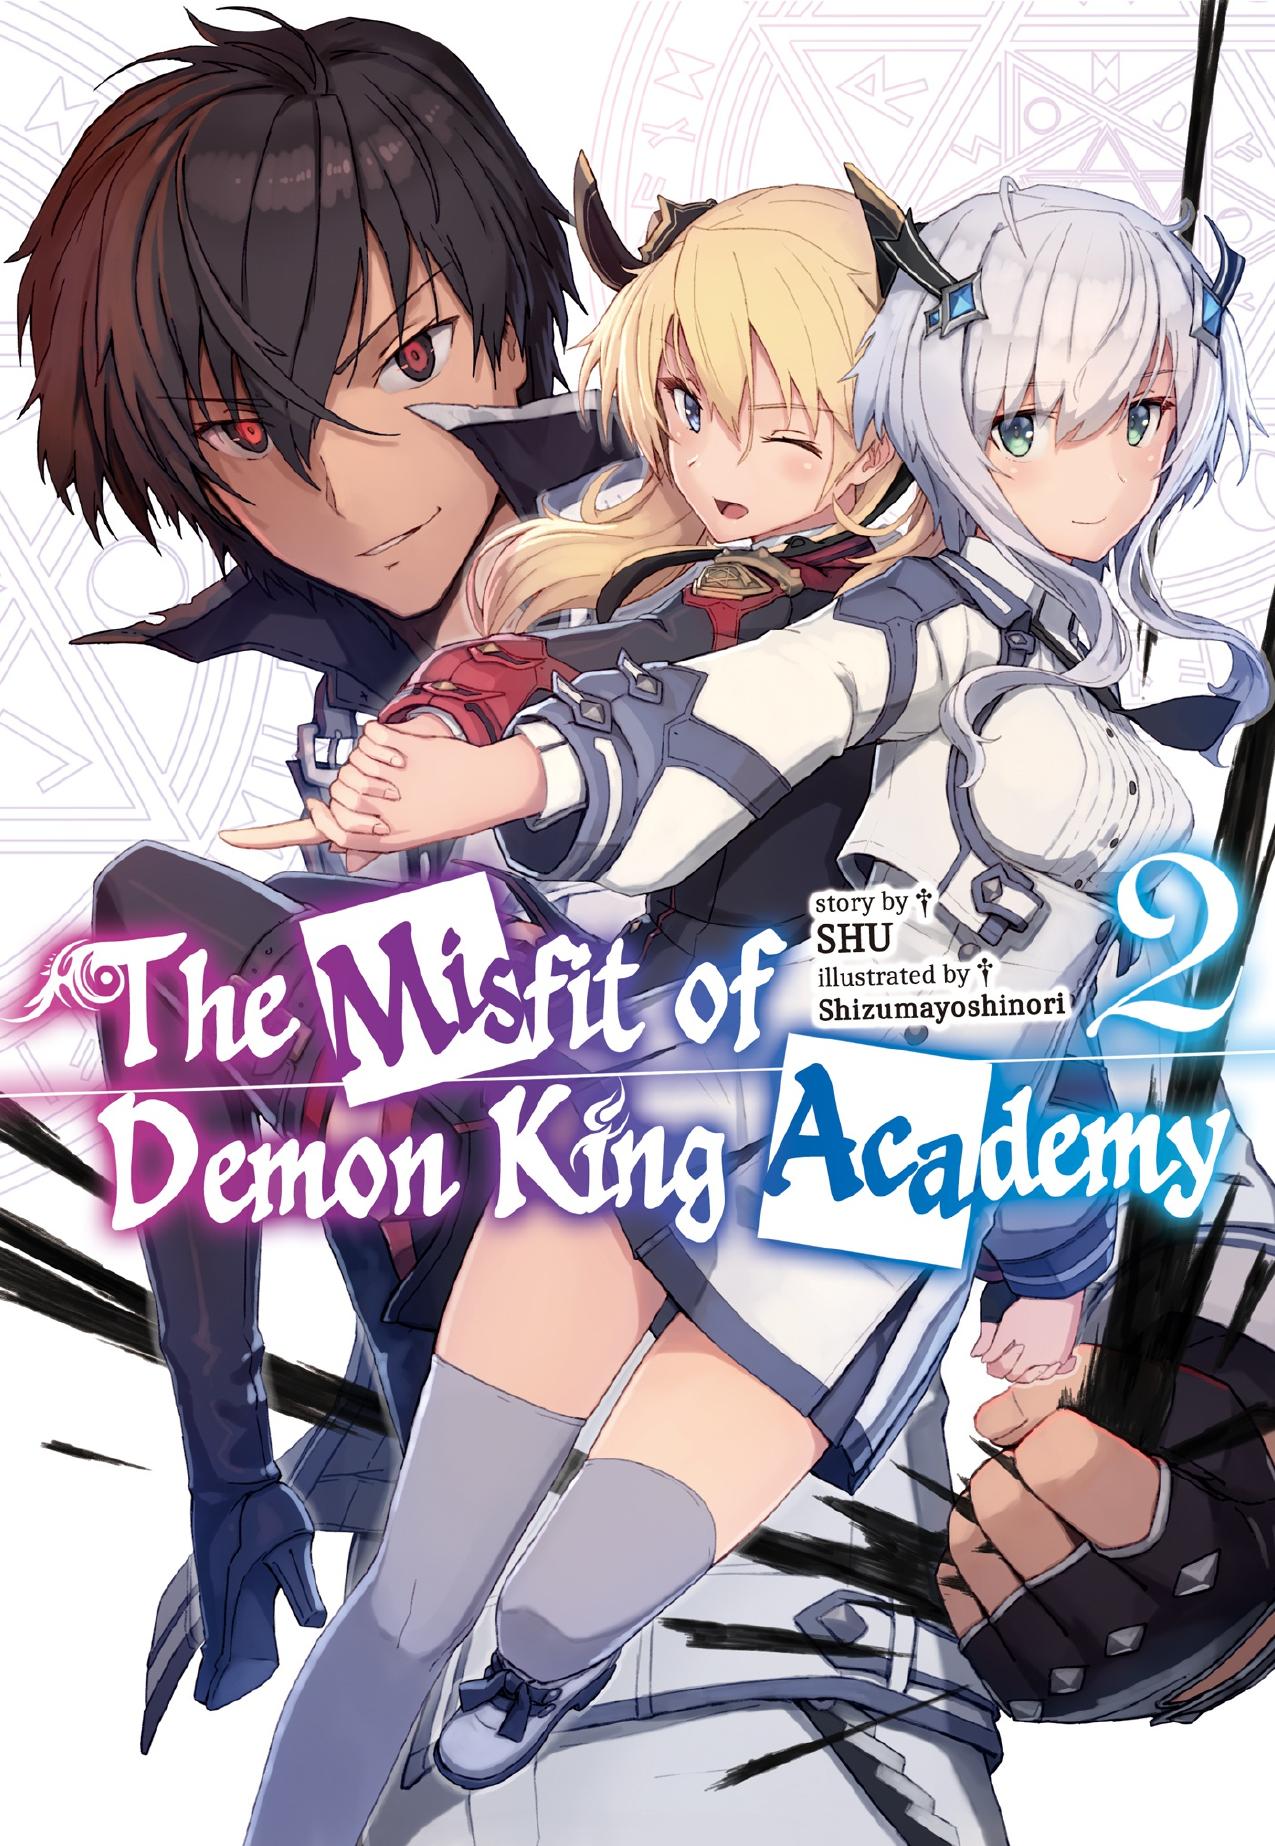 The Misfit of Demon King Academy: Volume 2 by SHU